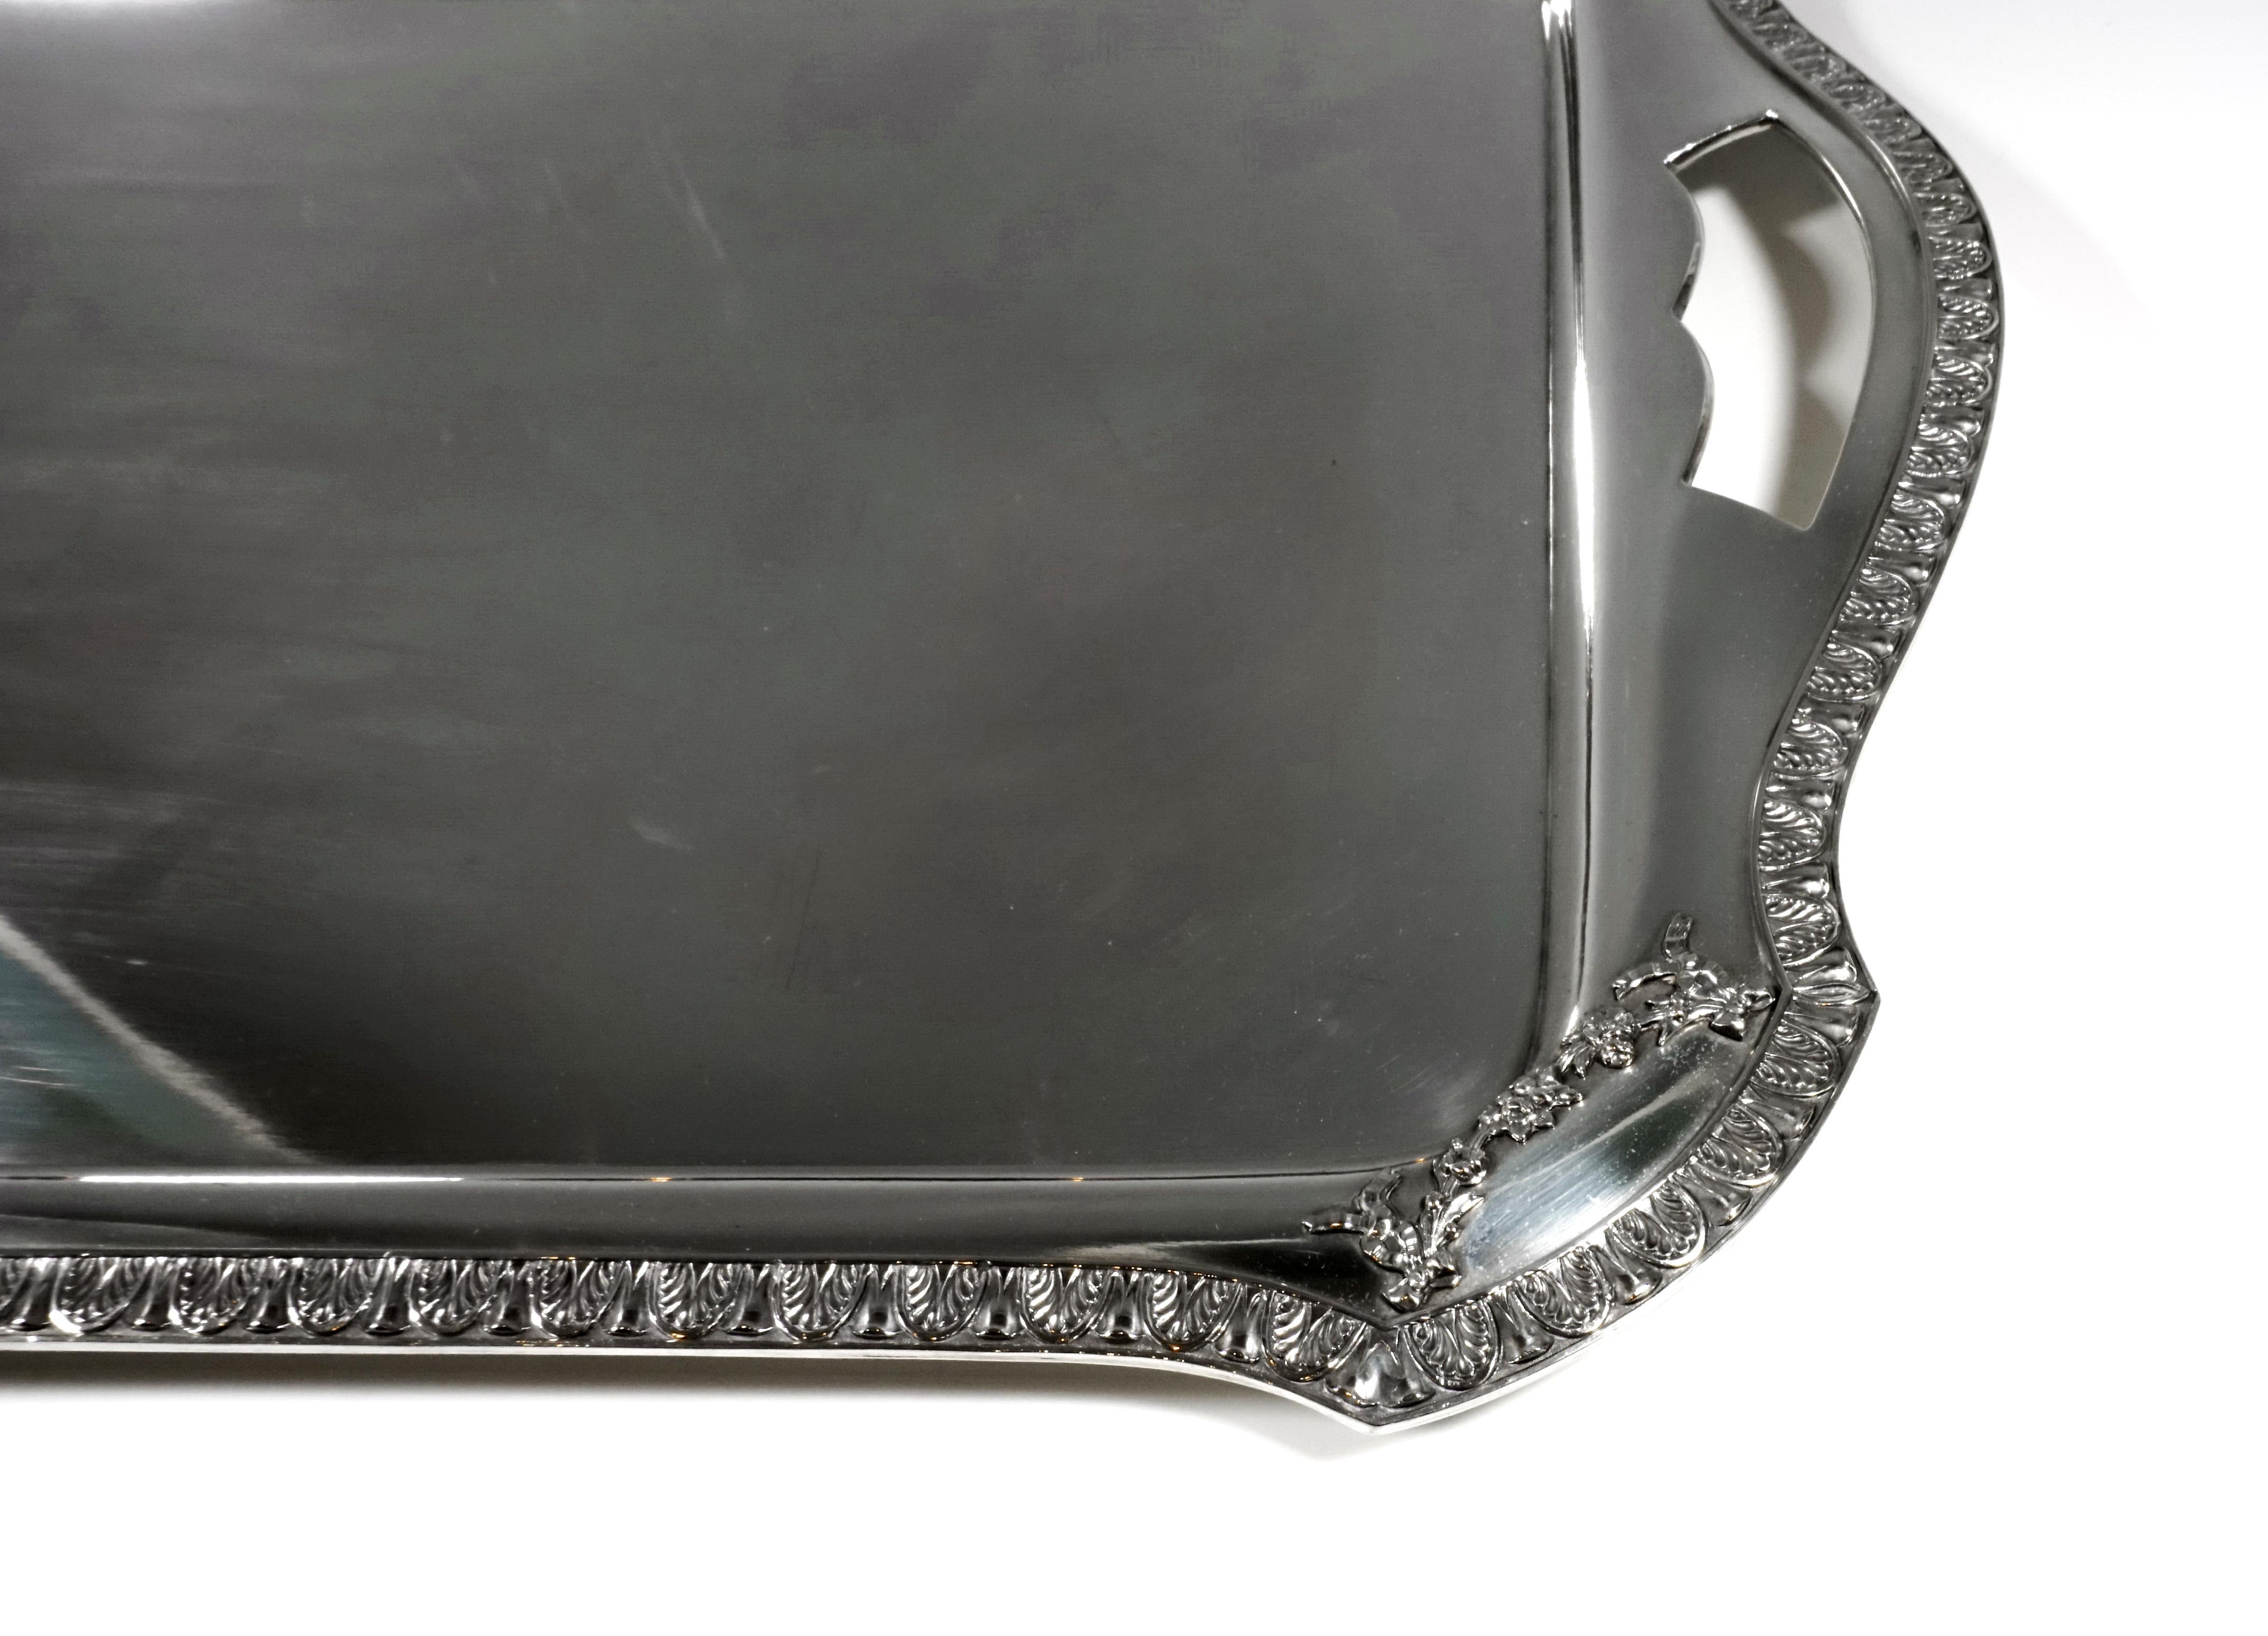 Rectangular shaped silver tray in a smooth, simple design with raised, flared edge with circumferential palmette band, beveled, rounded corners with flower garlands, extension of the edge piece on the broad sides with incised, curved